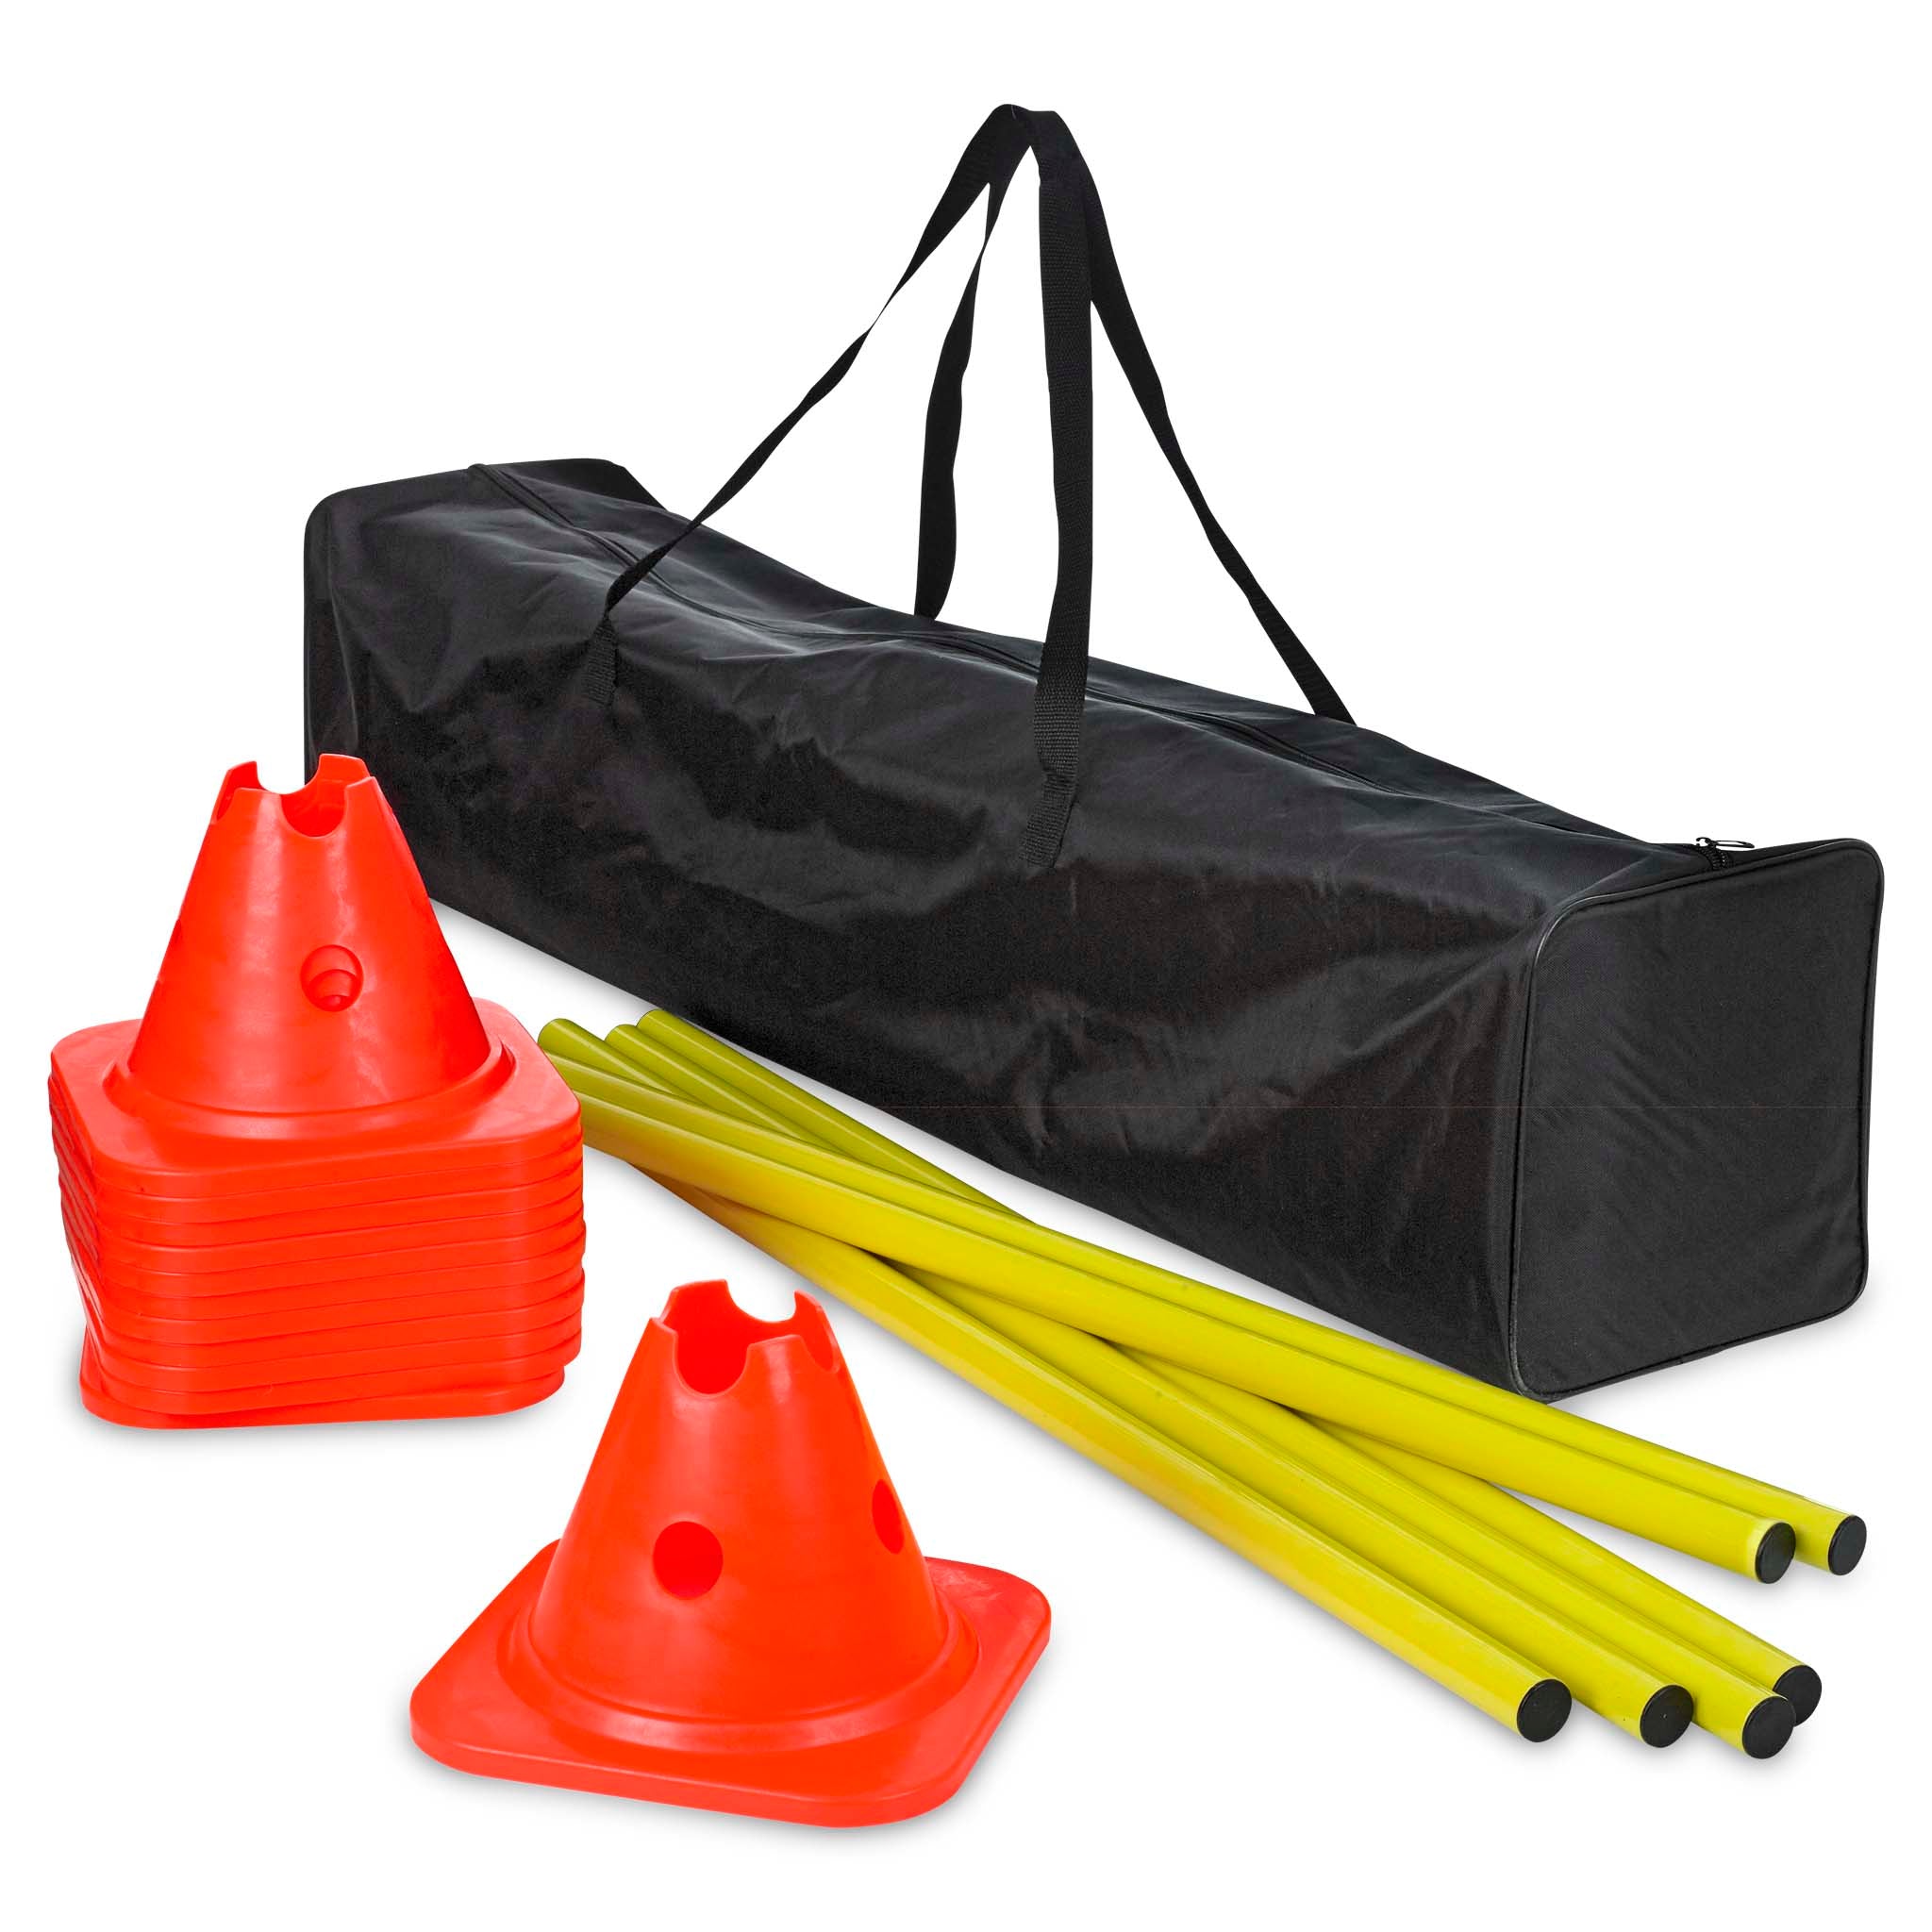 Agility set with cones and poles